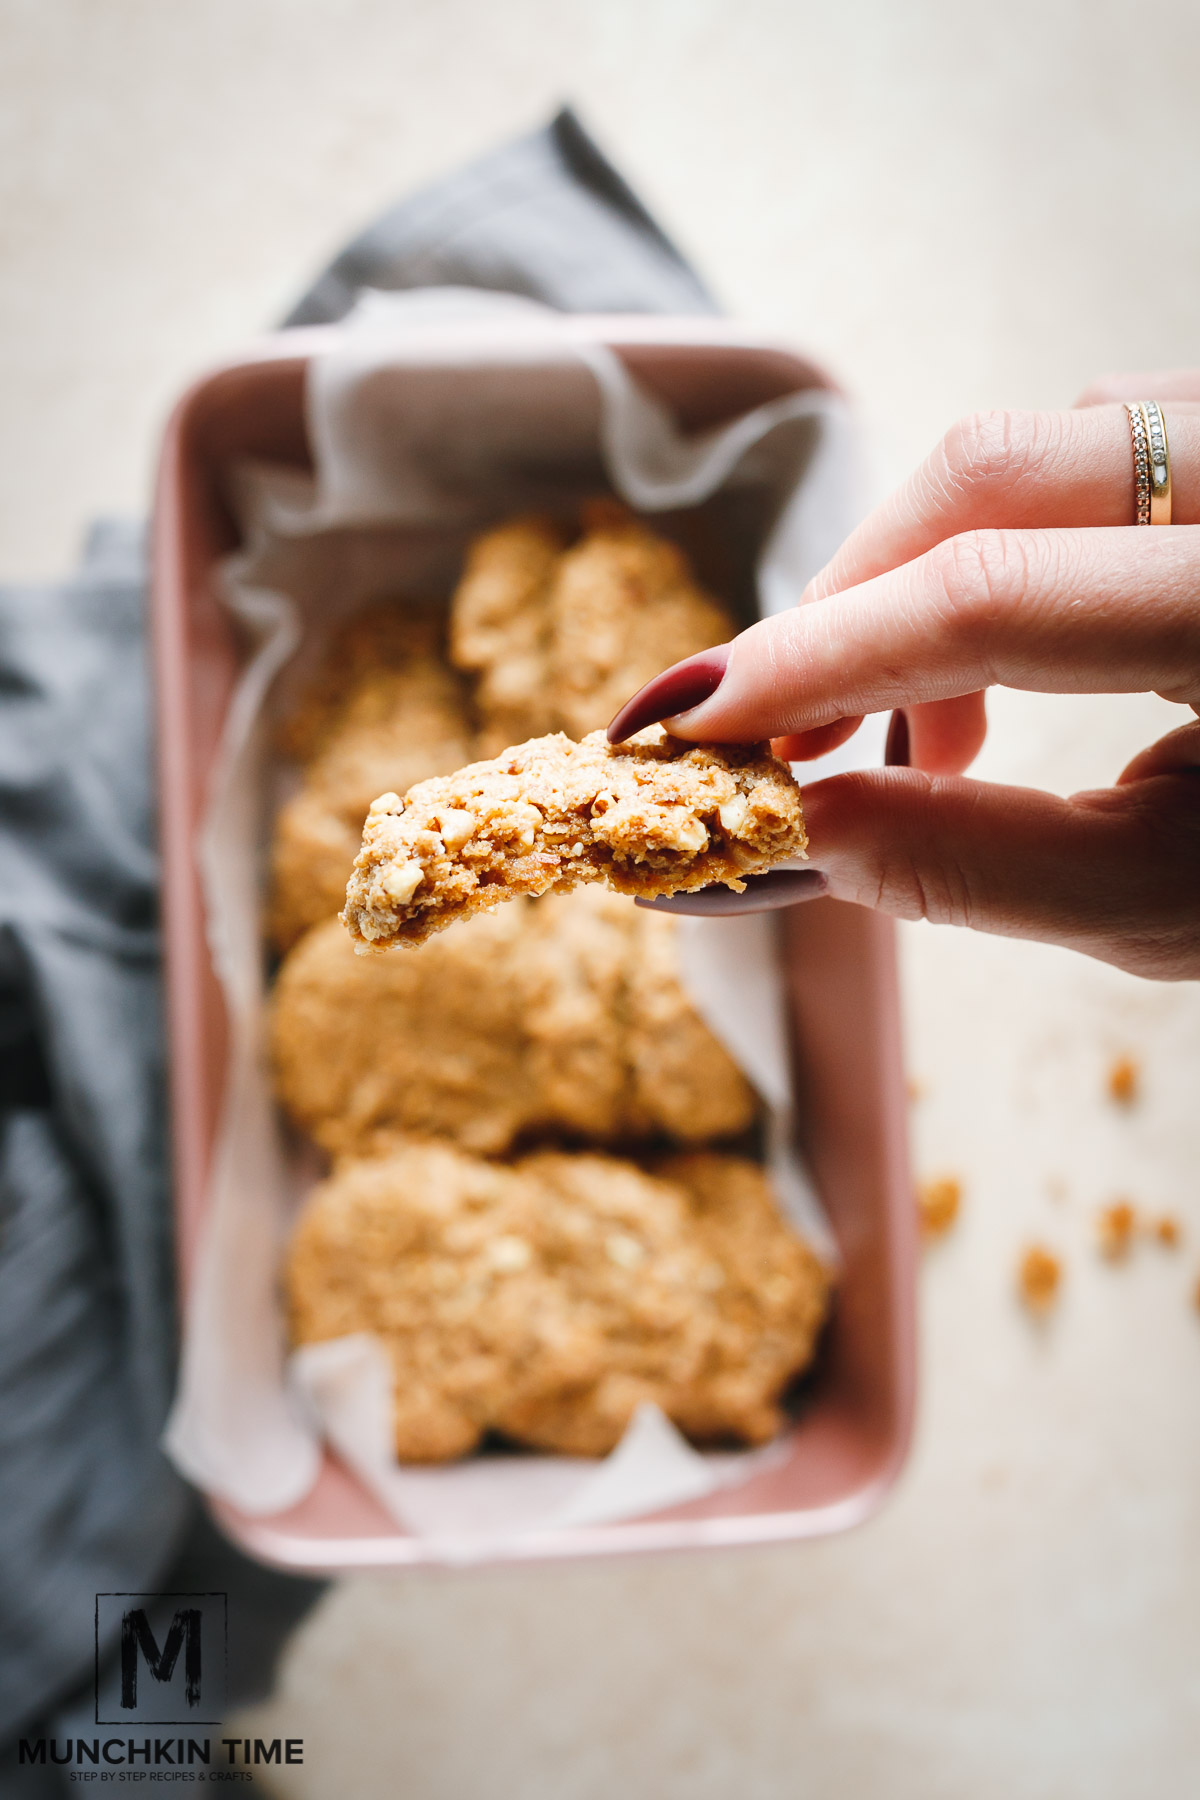 Best Ever Almond Butter Cookies Using Only 3 Ingredients, this easy almond cookie recipe will knock you off your feet. They are INCREDIBLY delicious!!!